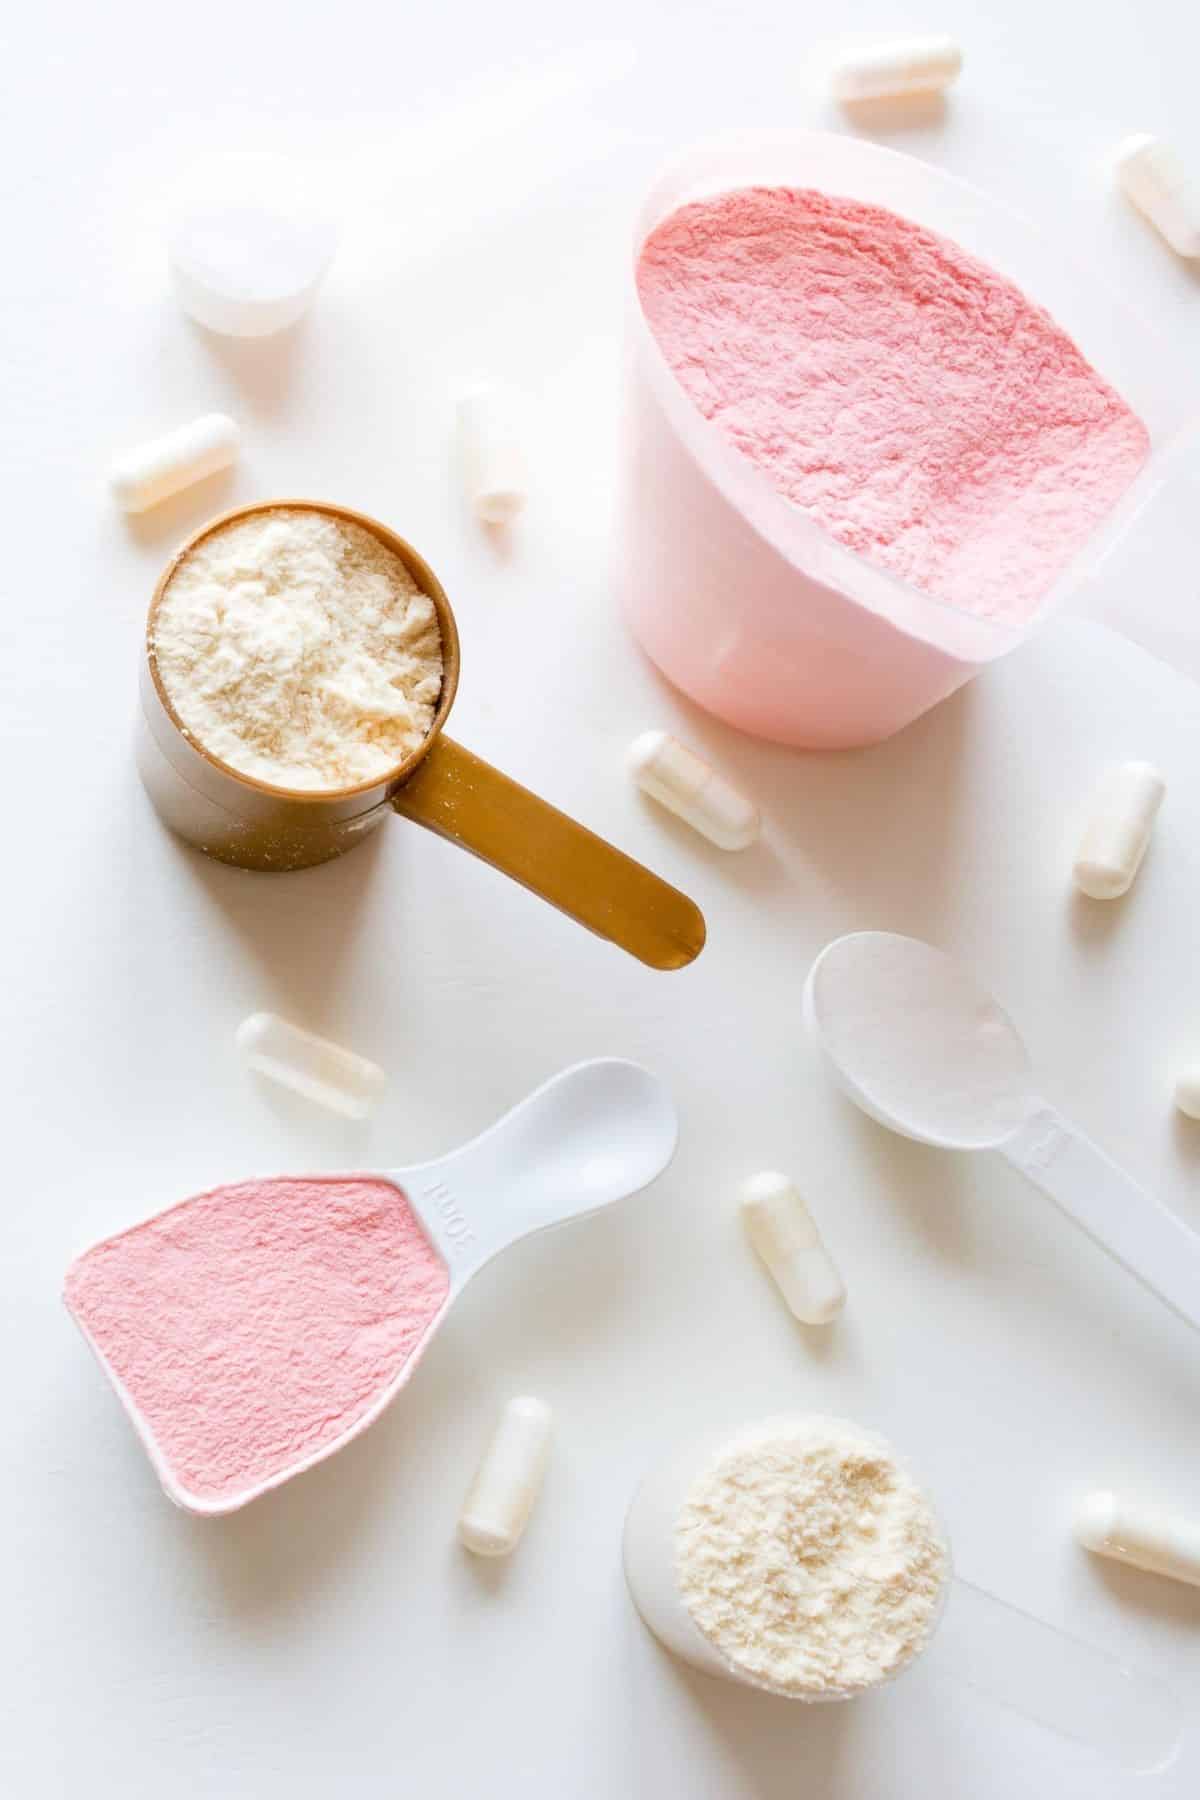 bowls of pink and white powders with some white capsules on a countertop